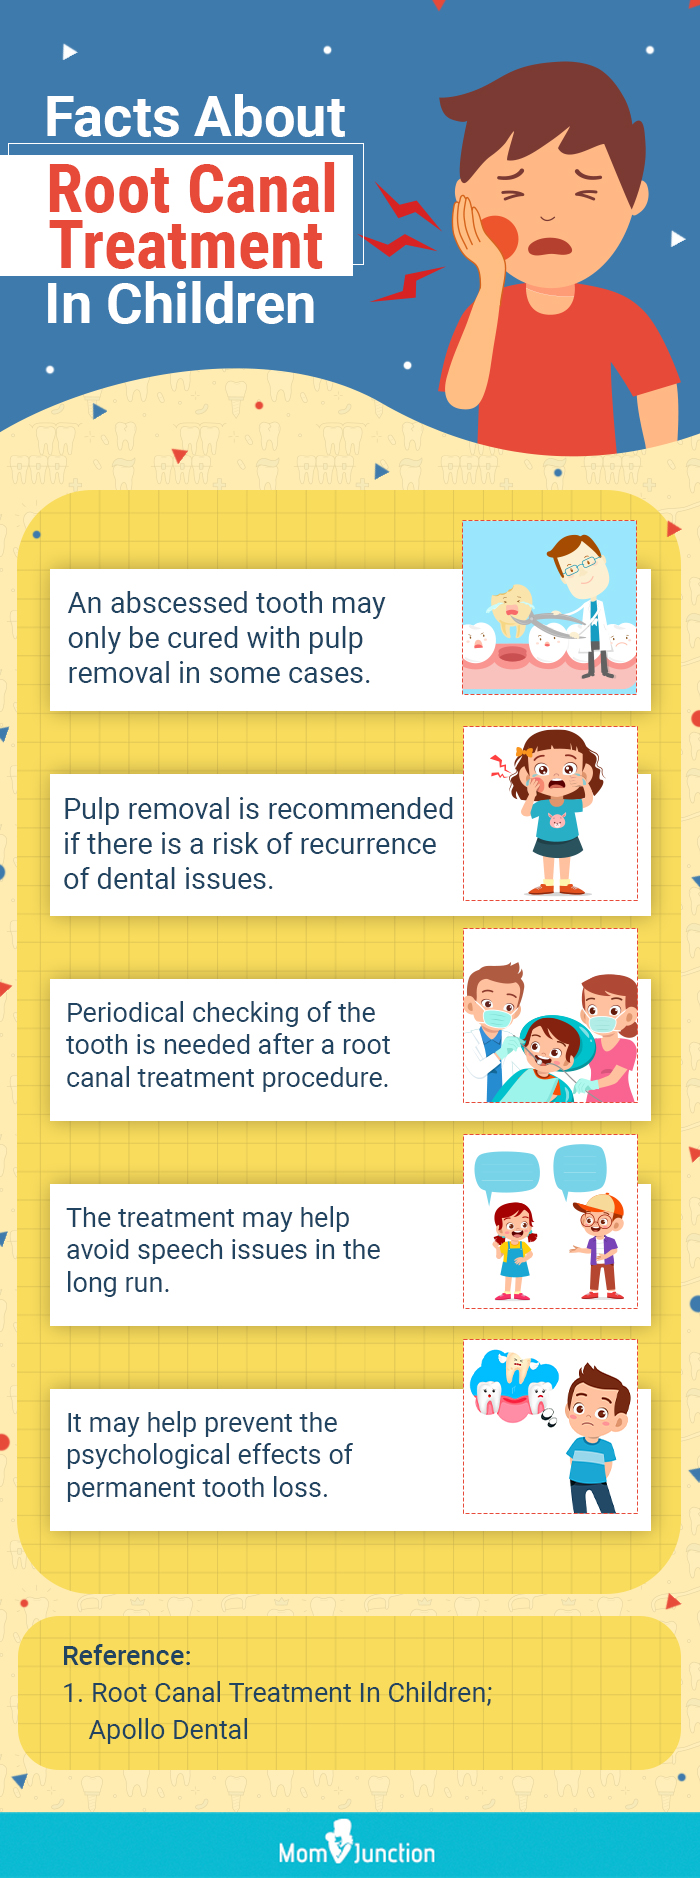 facts about root canal treatment in children [infographic]